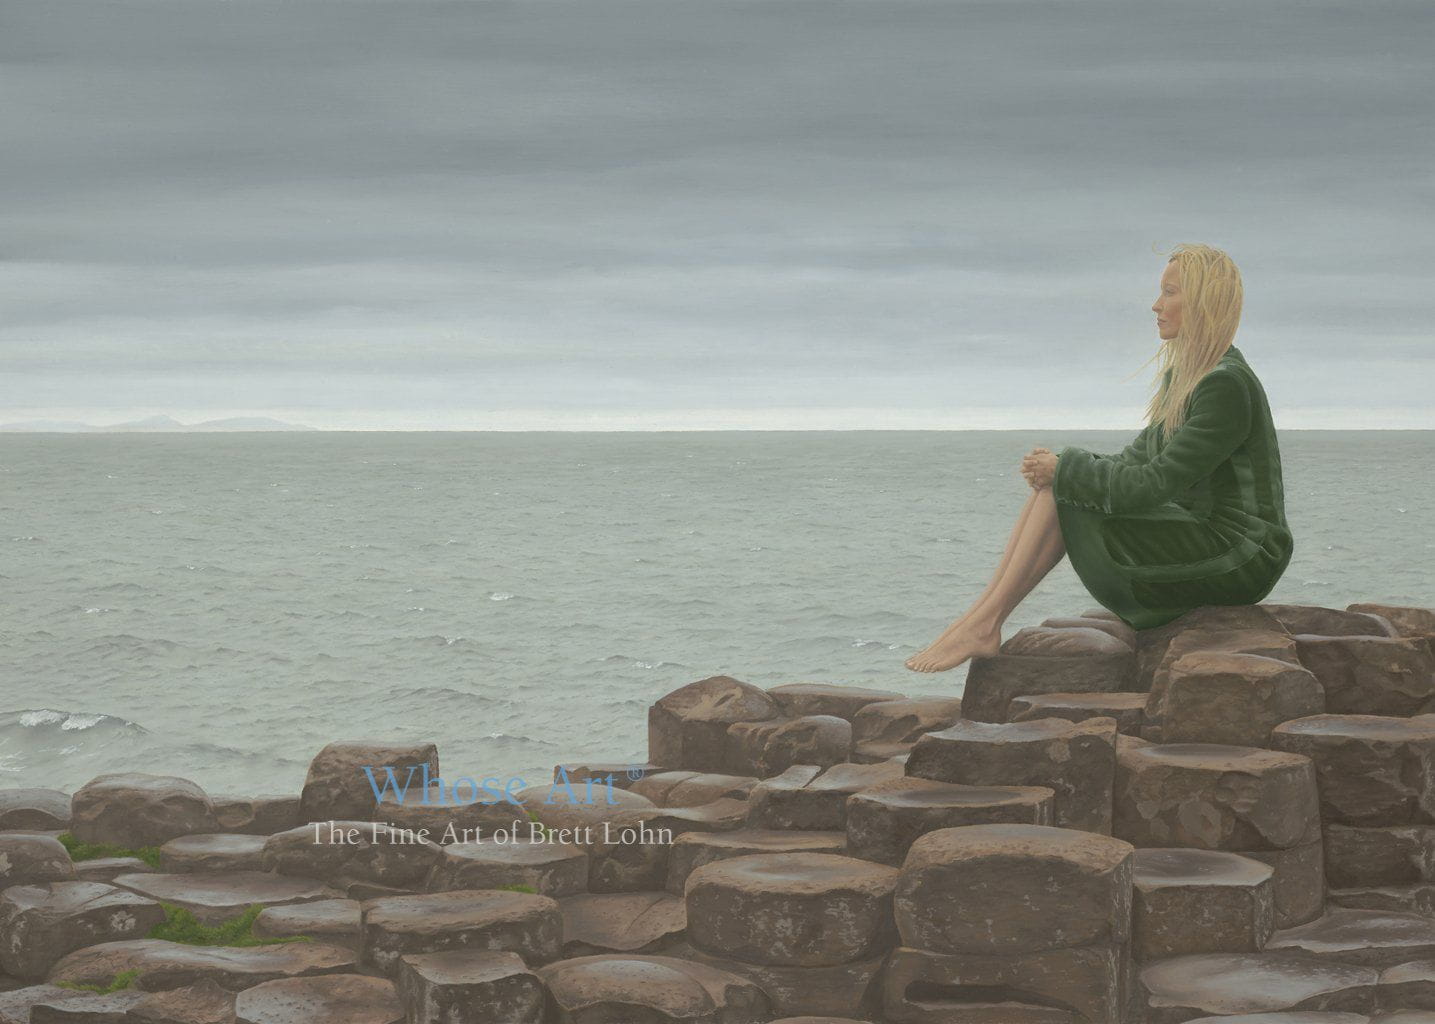 Fine art card size A5 of a painting depicting a young lady dressed in a green velvet coat, sitting on Giant's Causeway